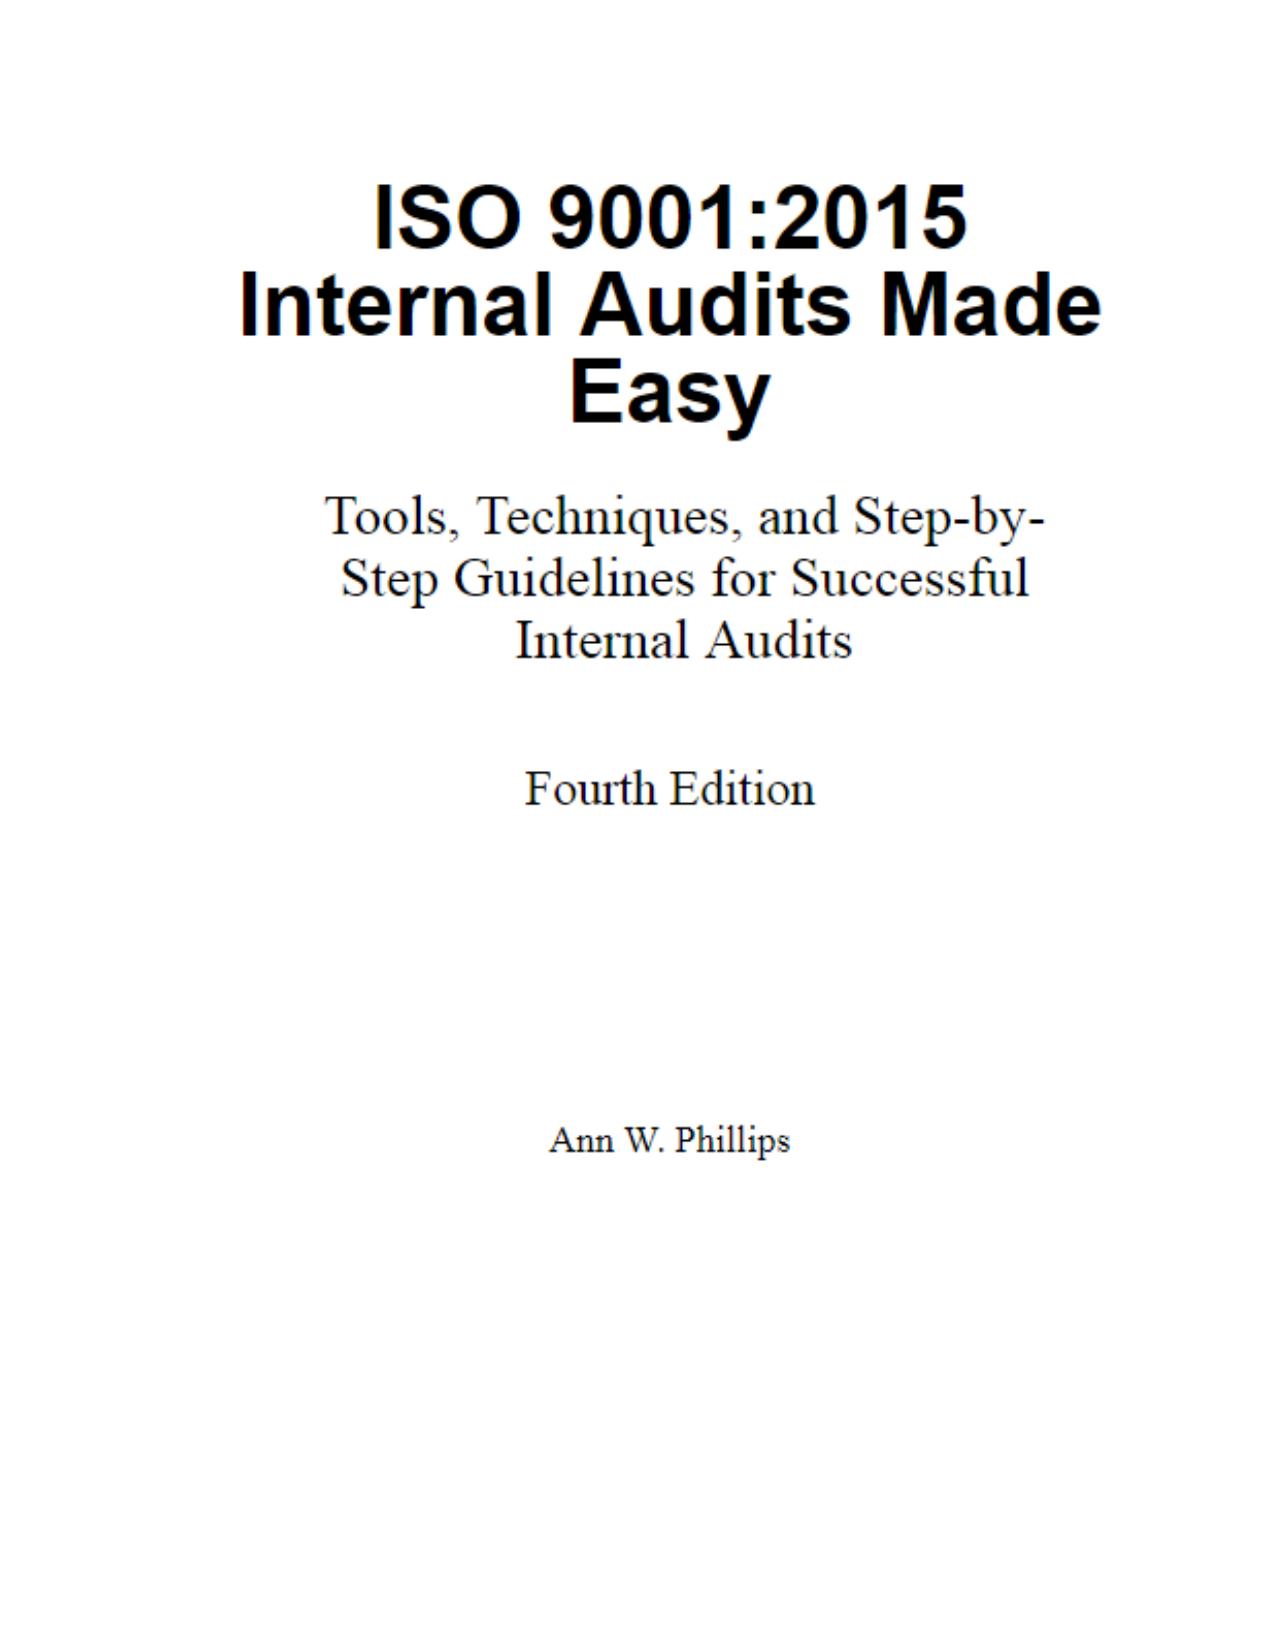 ISO 9001 2015 Internal Audits Made Easy